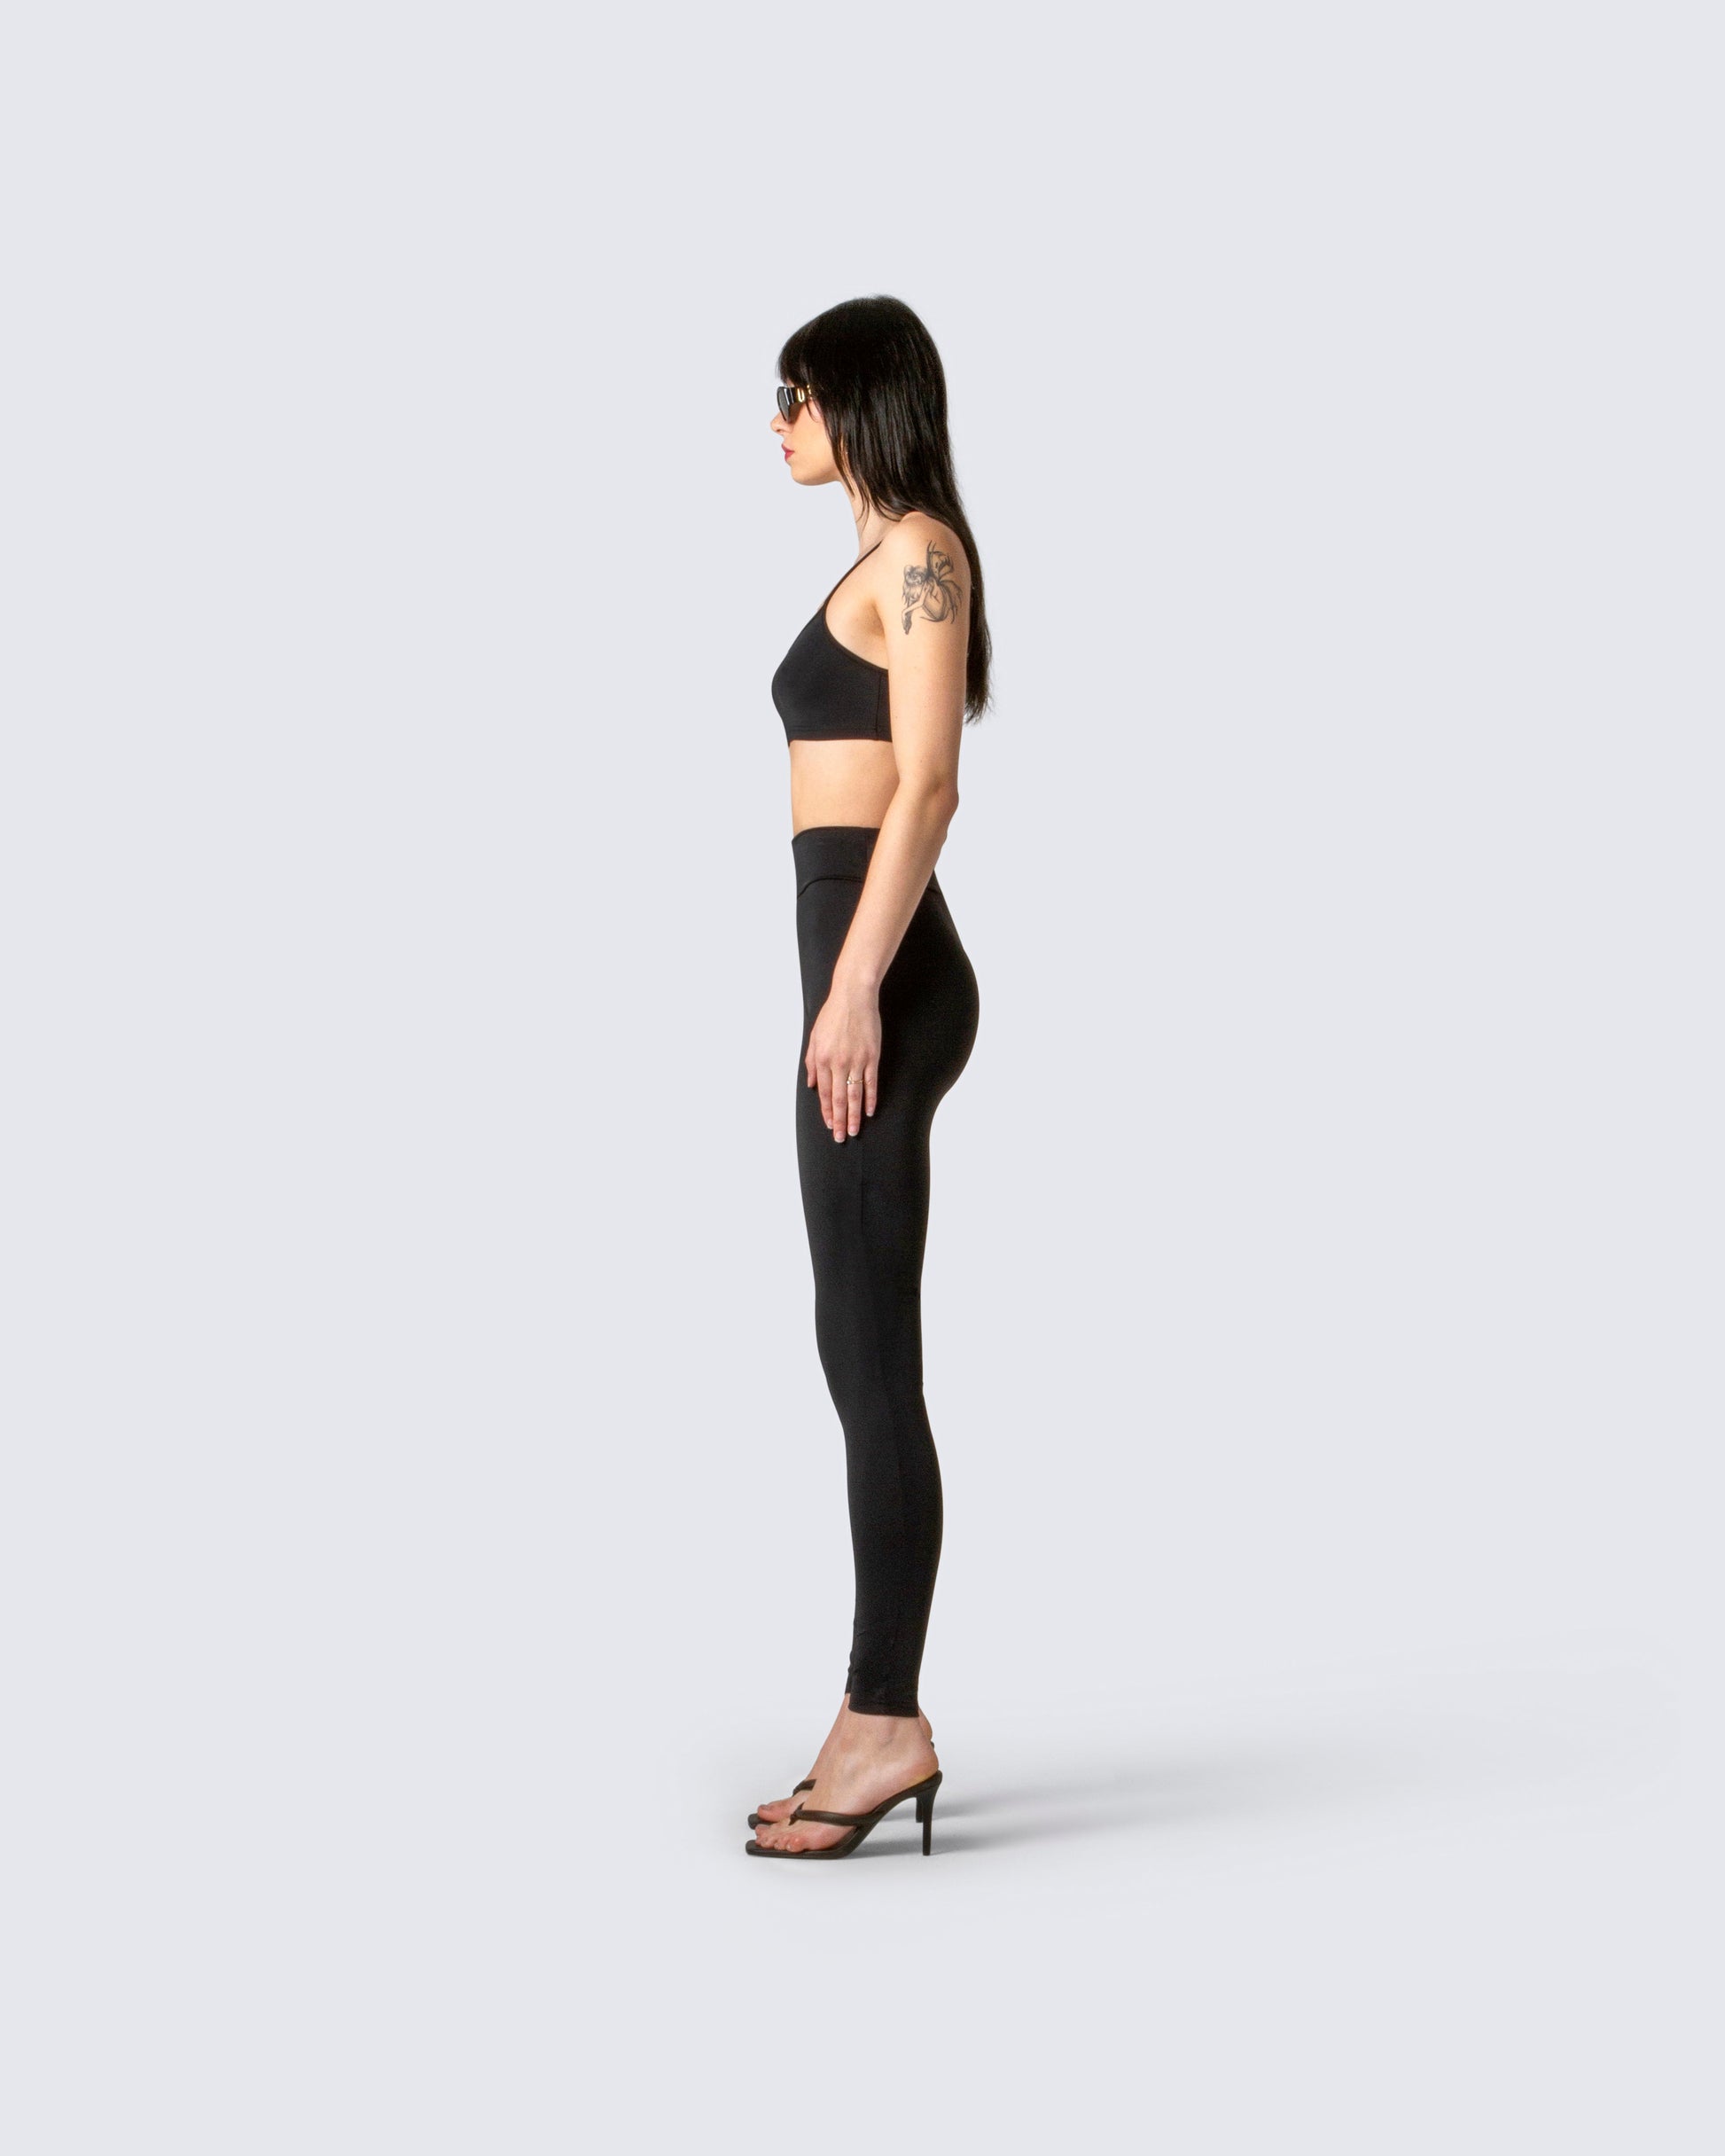 Black Cotton Leggings – Discovery Activewear